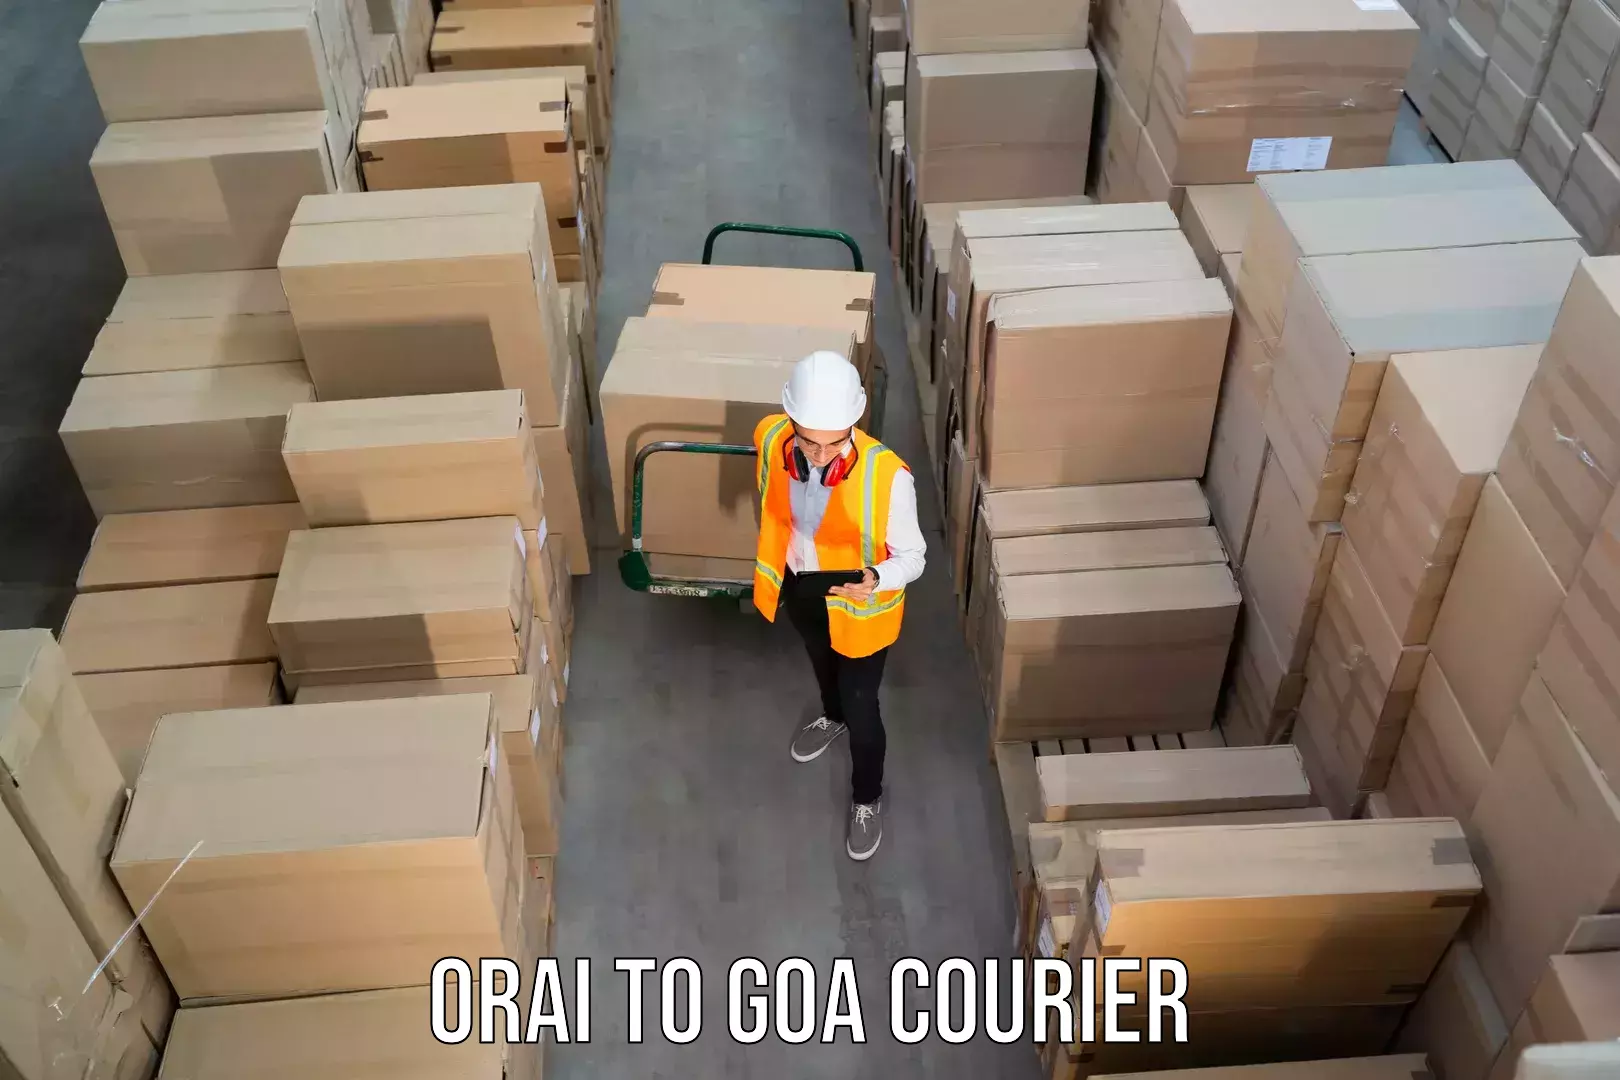 Nationwide delivery network Orai to Goa